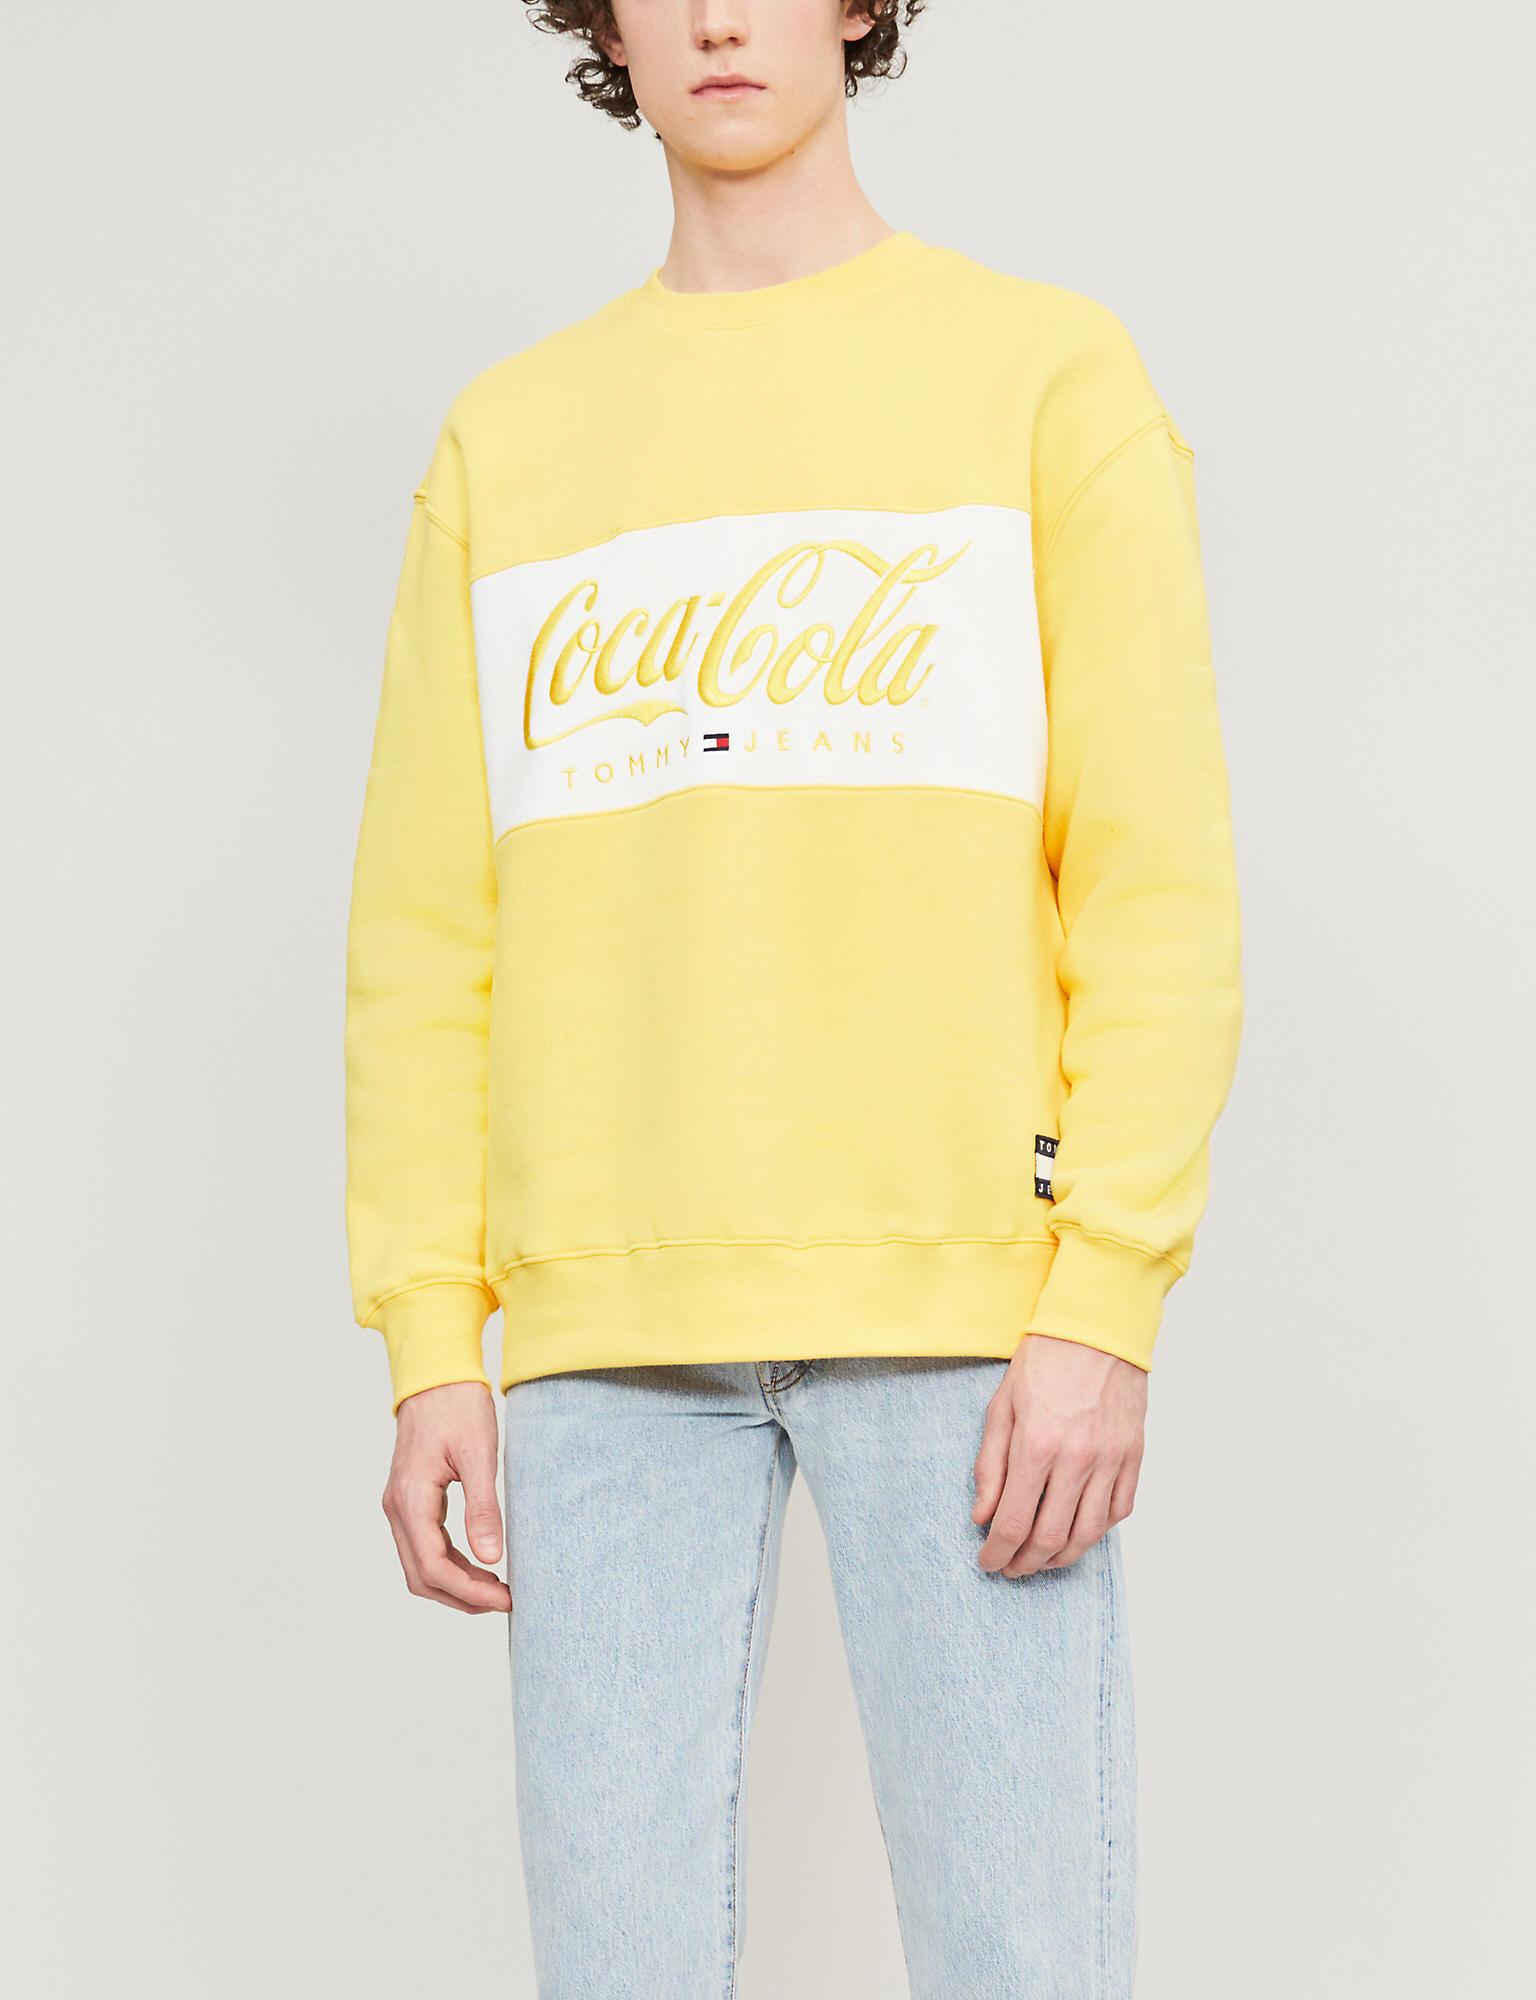 Tommy Hilfiger Sweatshirt Yellow Outlet, SAVE 52% - edv.no